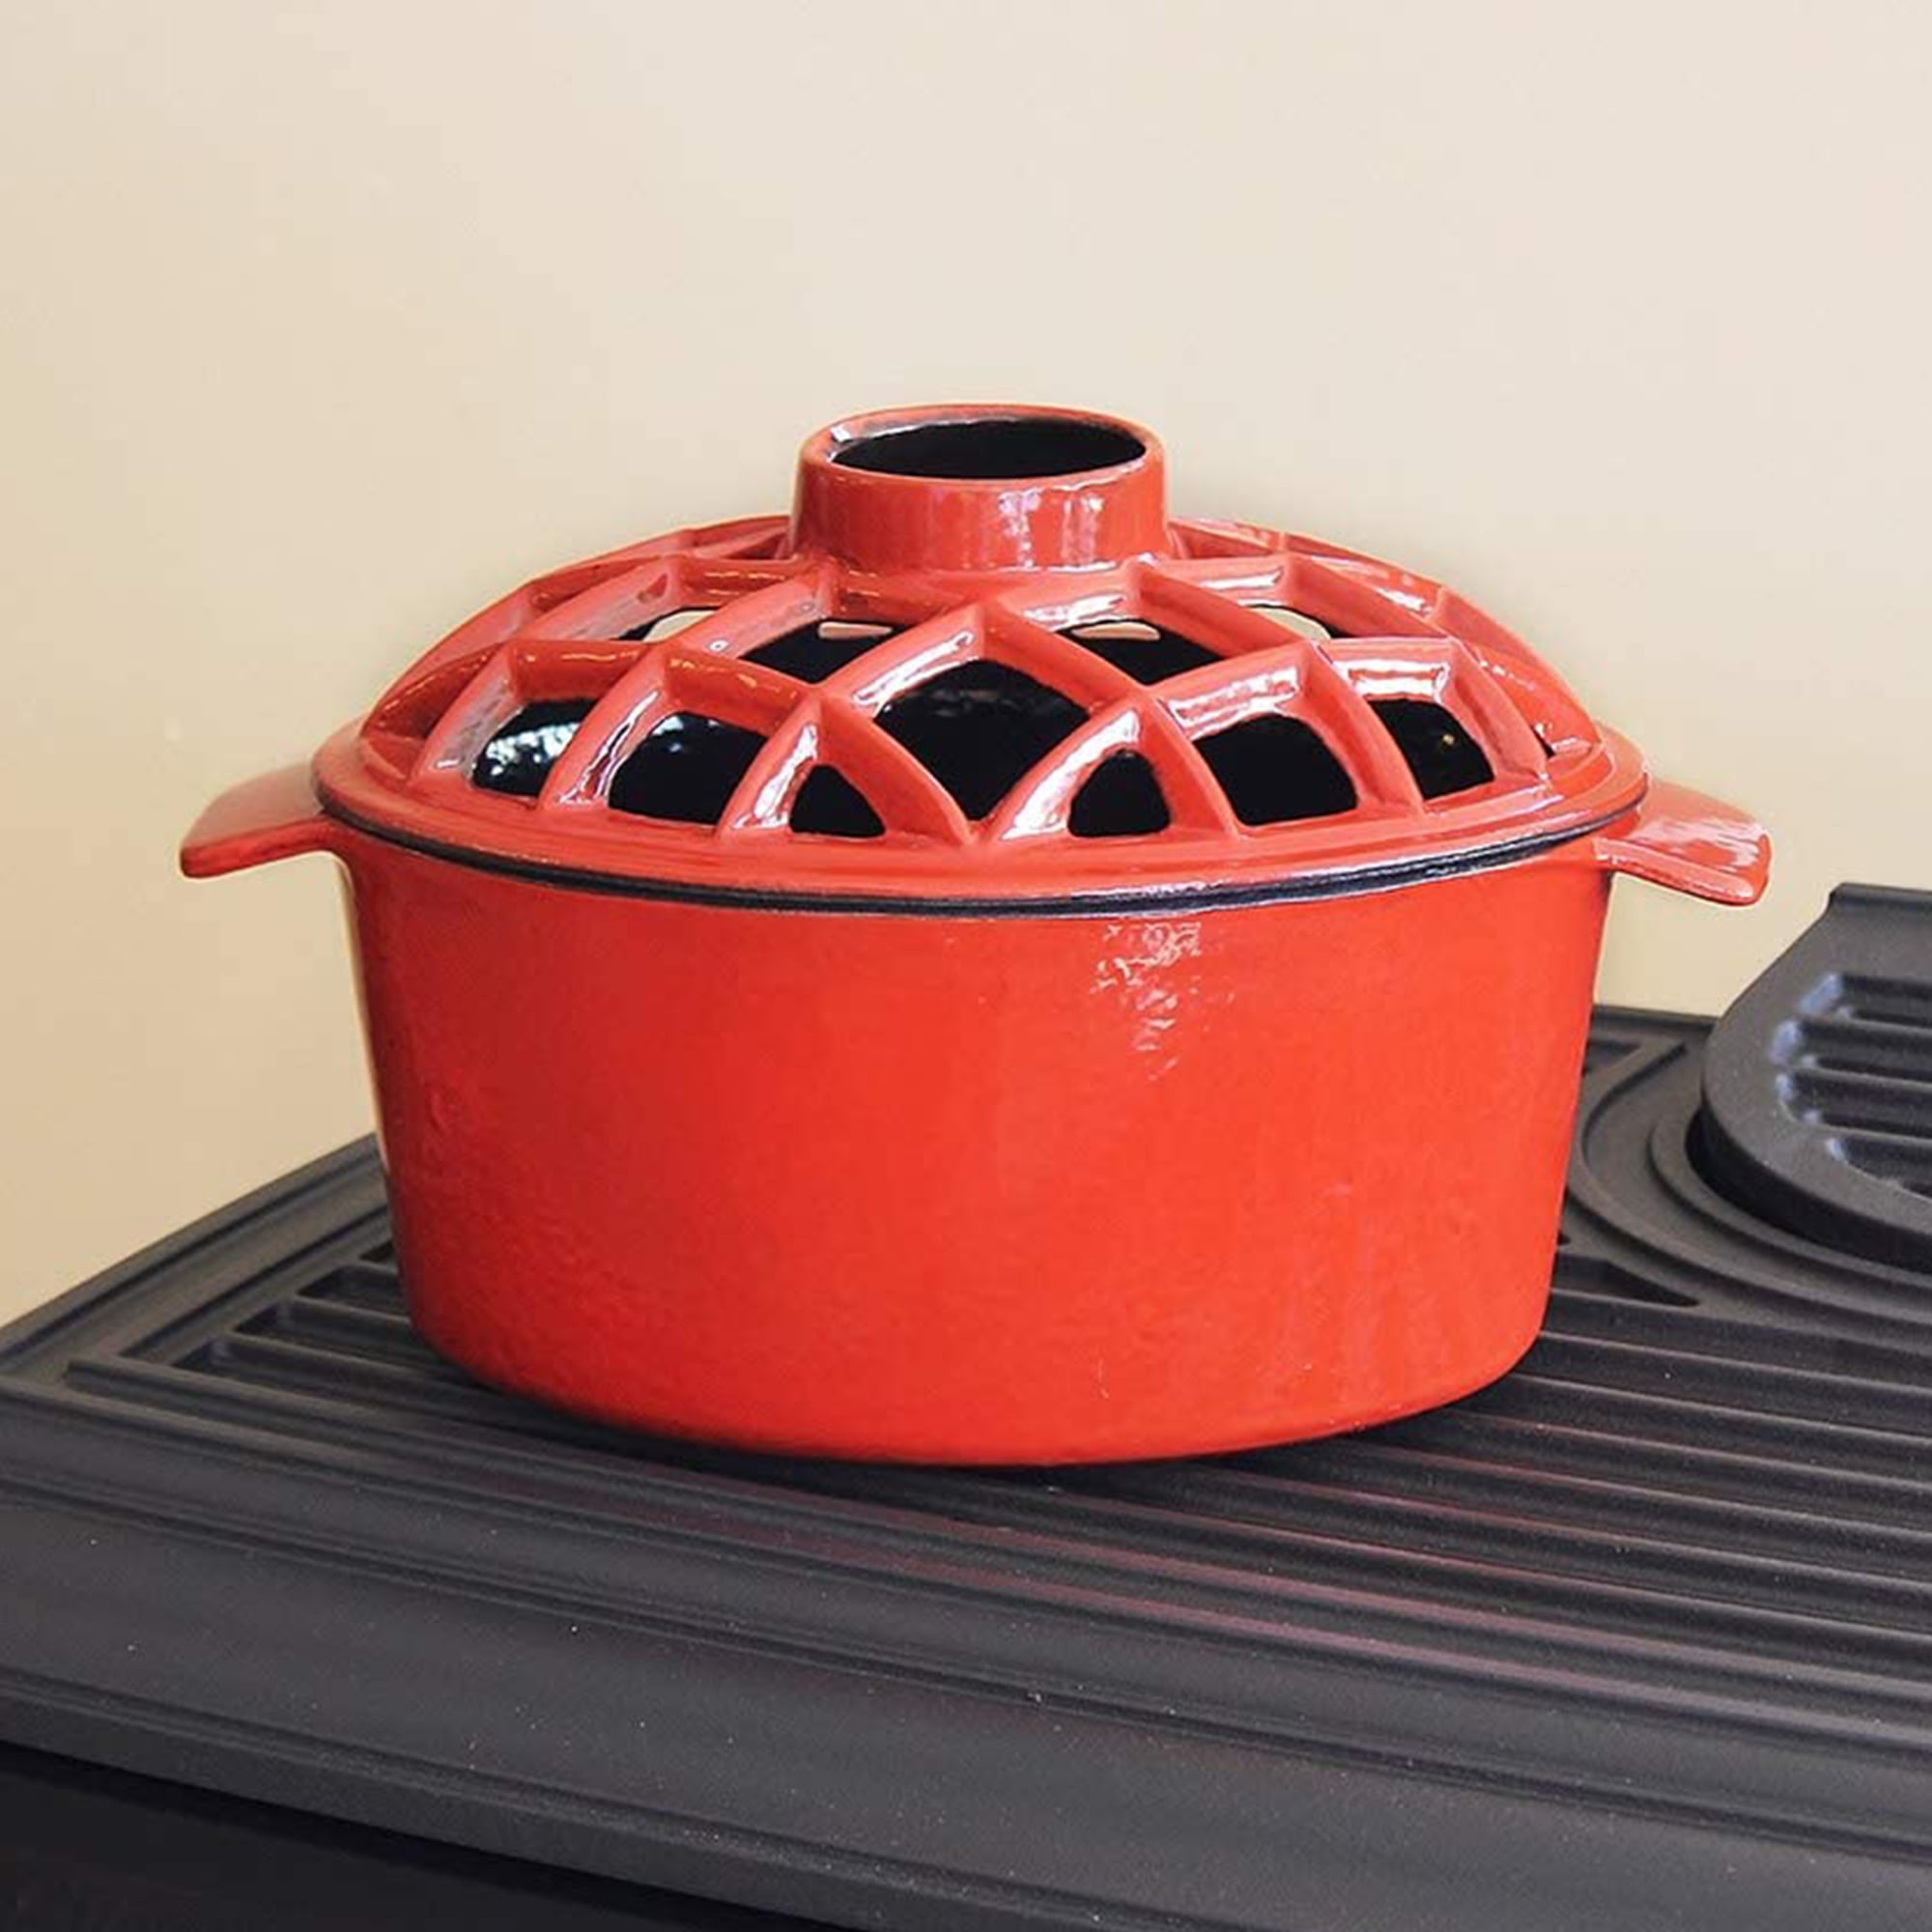 Plow & Hearth - 1.5 Quart Cast Iron Lattice Wood Stove Steamer Kettle /  Humidifier, Red